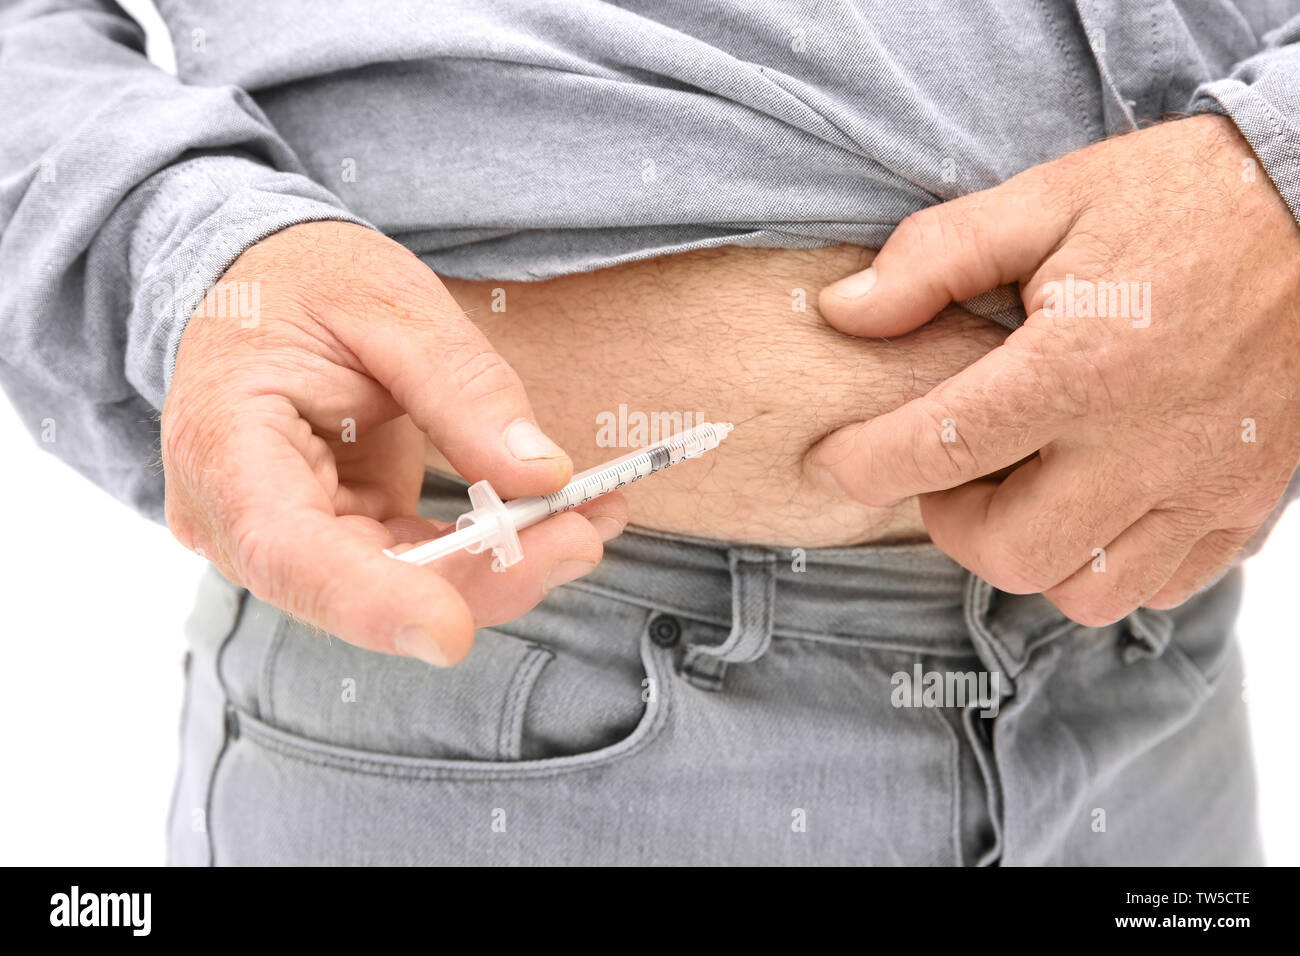 Diabetic patient injecting insulin in stomach, closeup Stock Photo